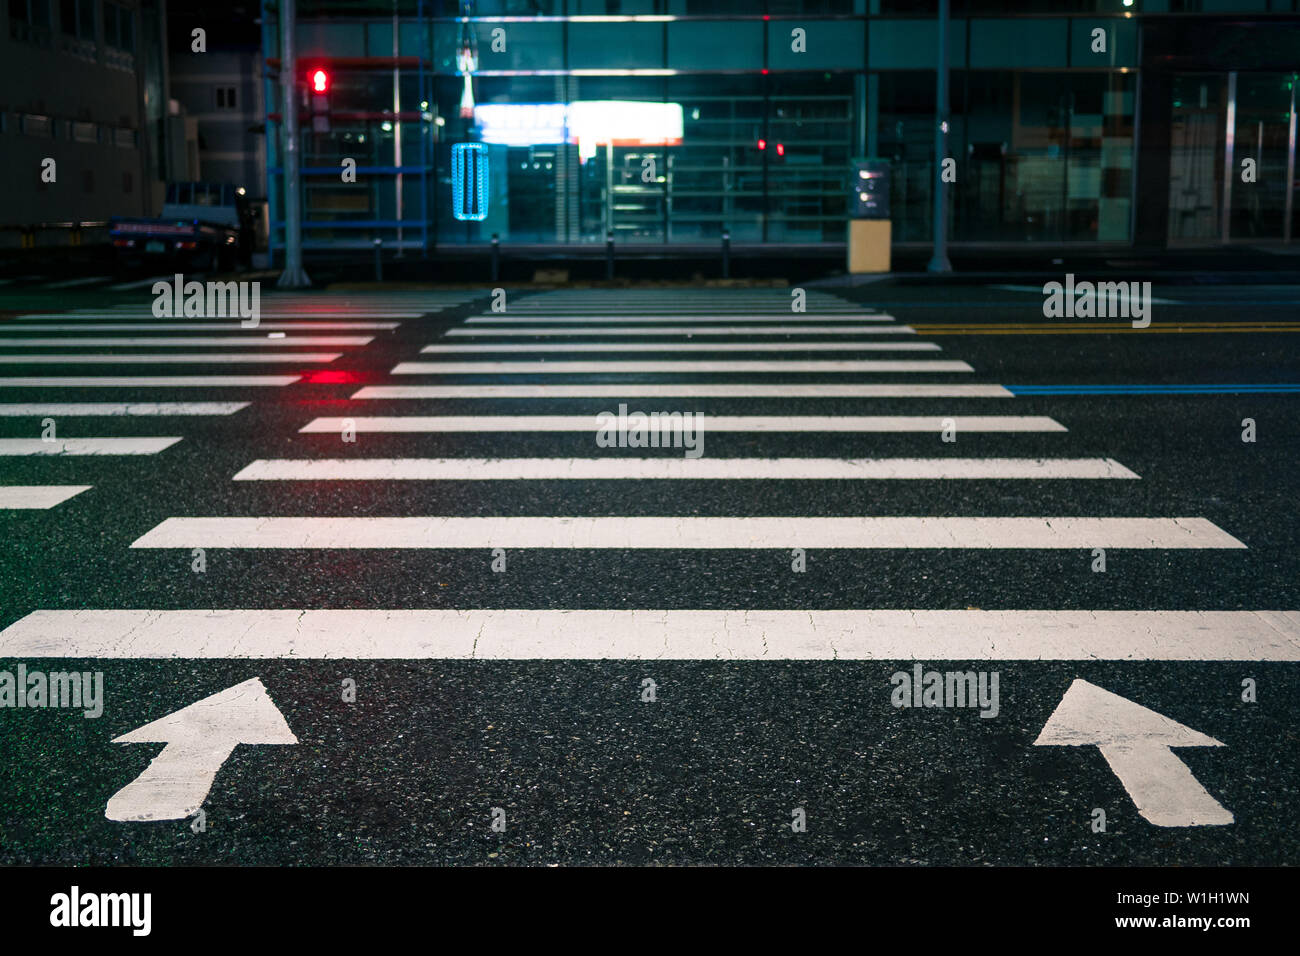 Pedestrian crossing with directional arrows at night. pedestrian marking on wet pavement. red signal for traffic lights. pedestrian crossing opposite Stock Photo